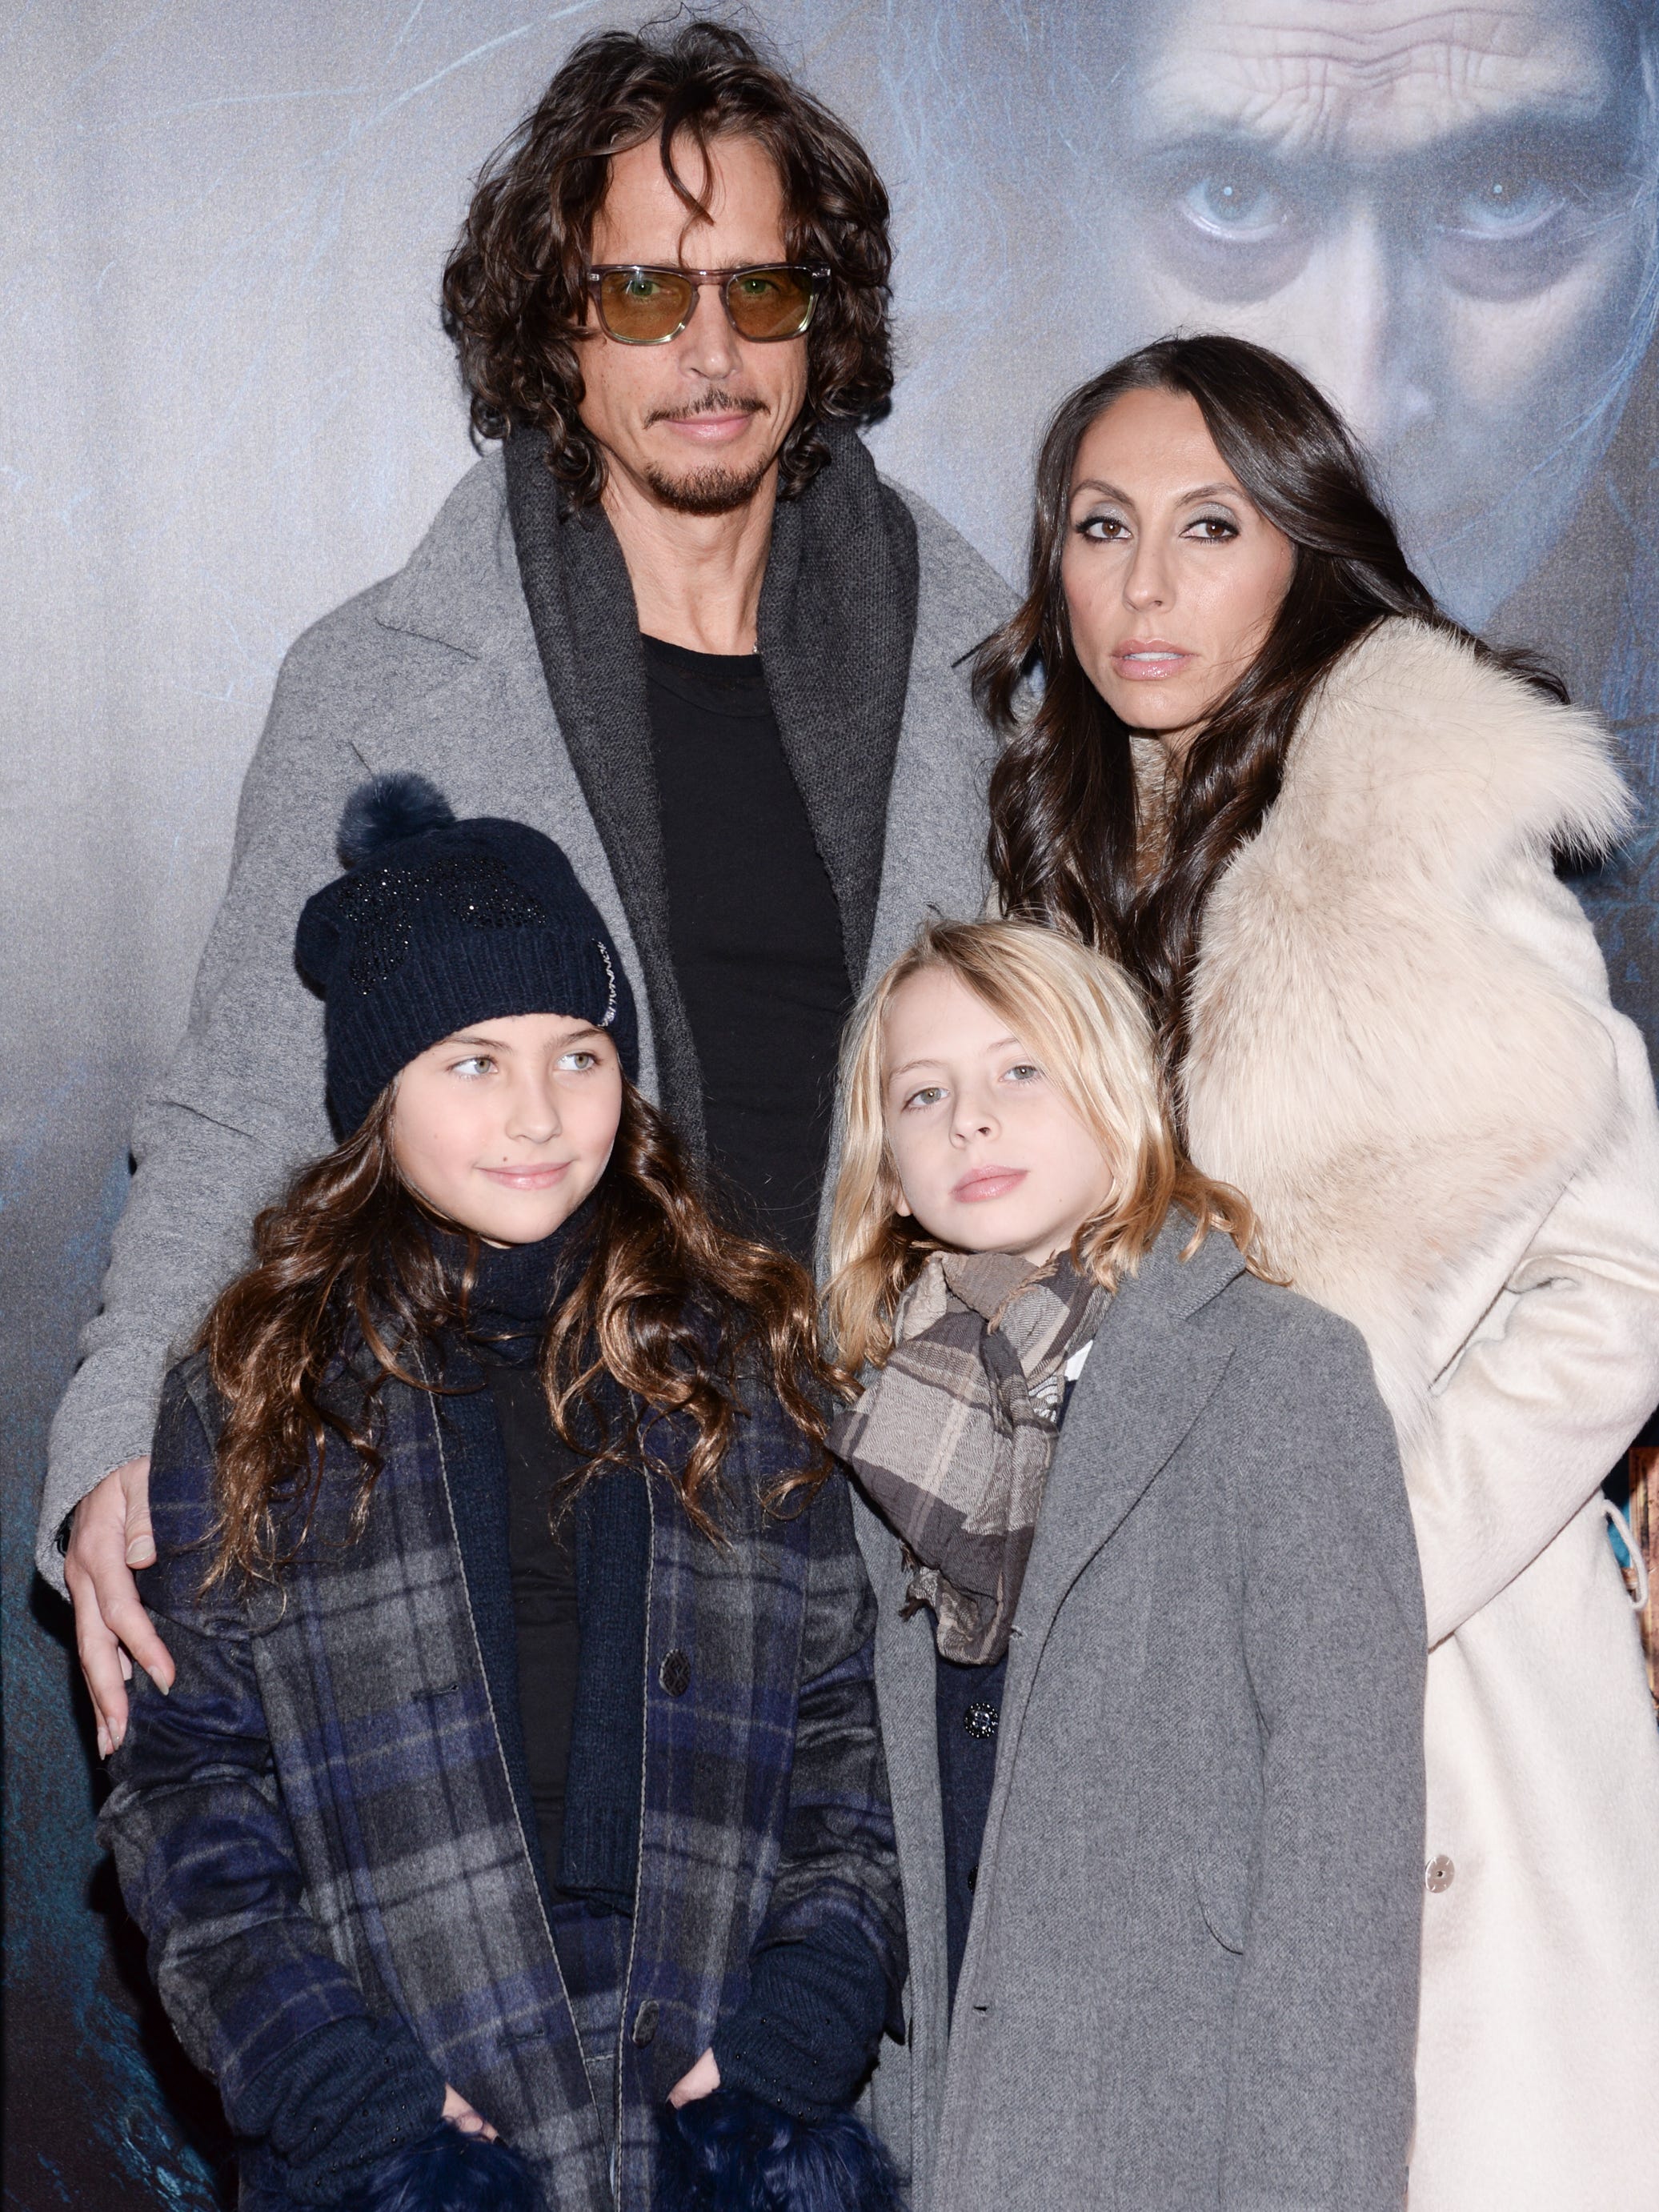 Chris Cornell poses with his wife Vicky and their children at the premiere of "Into The Woods" at the Ziegfeld Theatre, Dec. 8, 2014, in New York.